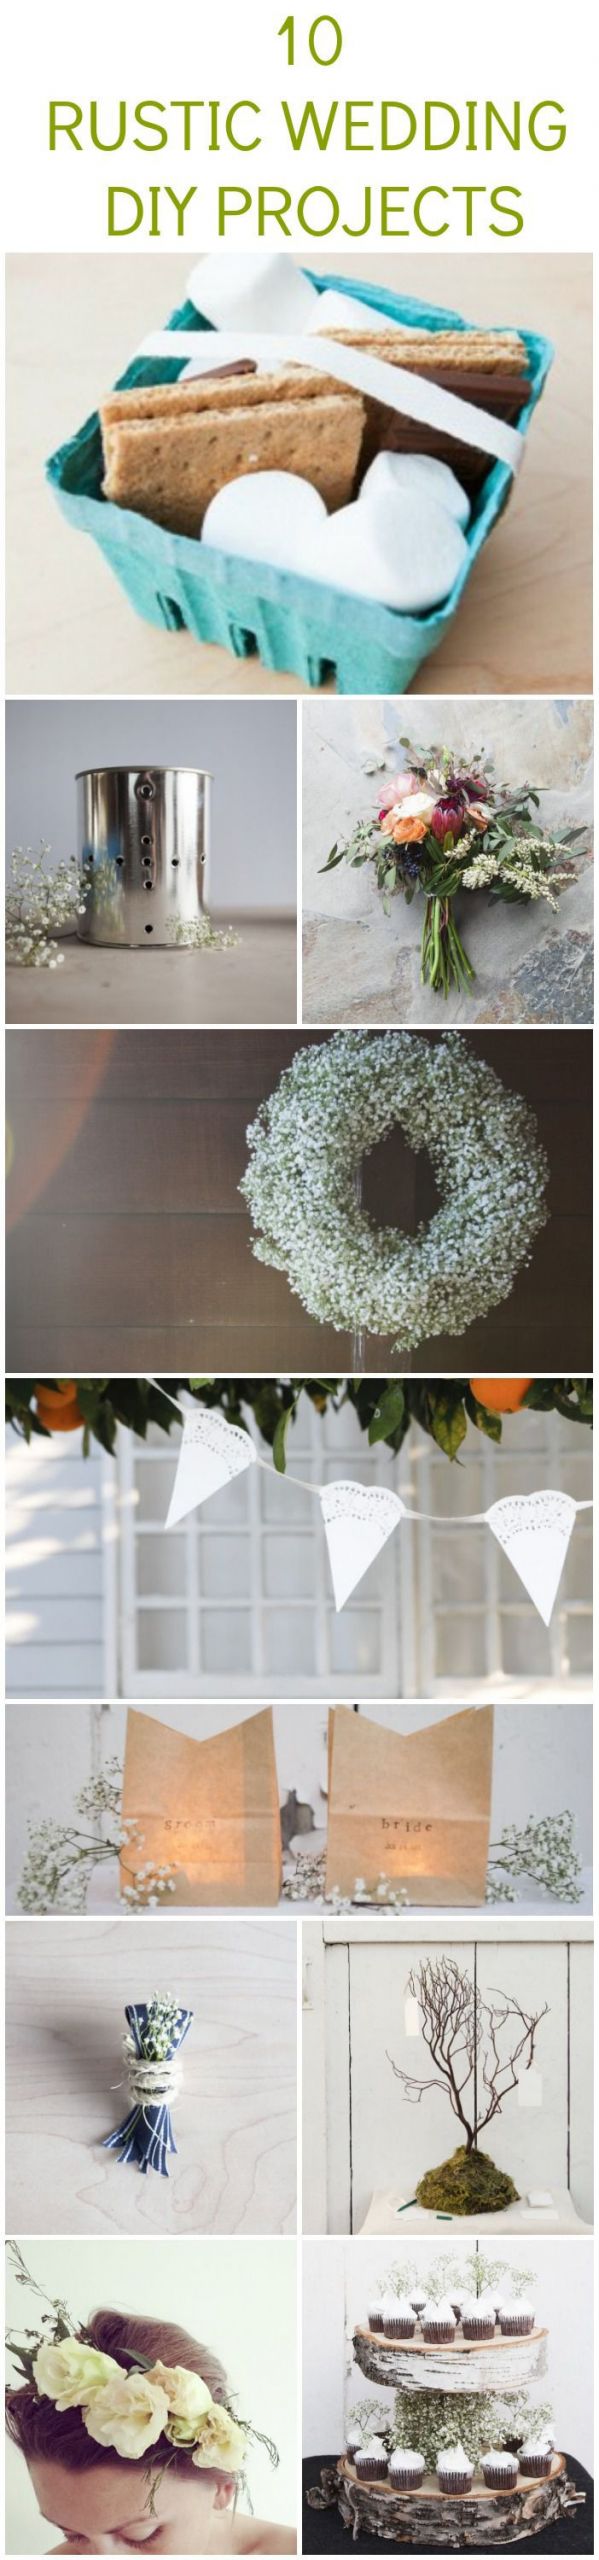 Wedding DIY Projects
 10 Rustic Wedding DIY Projects You Should Try Rustic